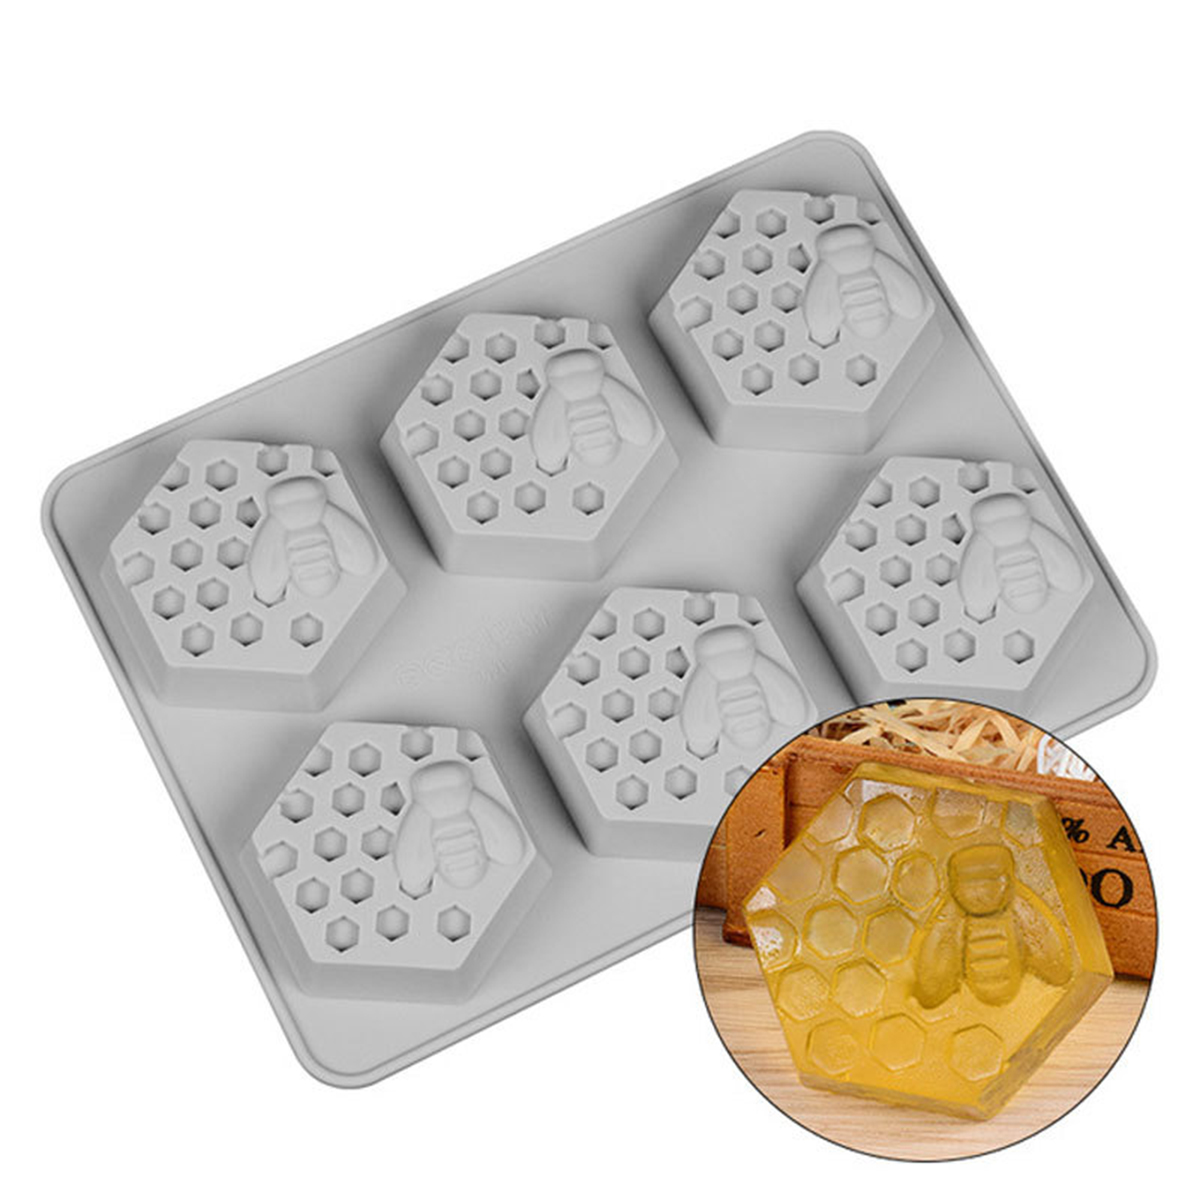 

6 Cavity Silicone Cookie Handmade Soap Mould Honey Bee Design Ice Cube Mold